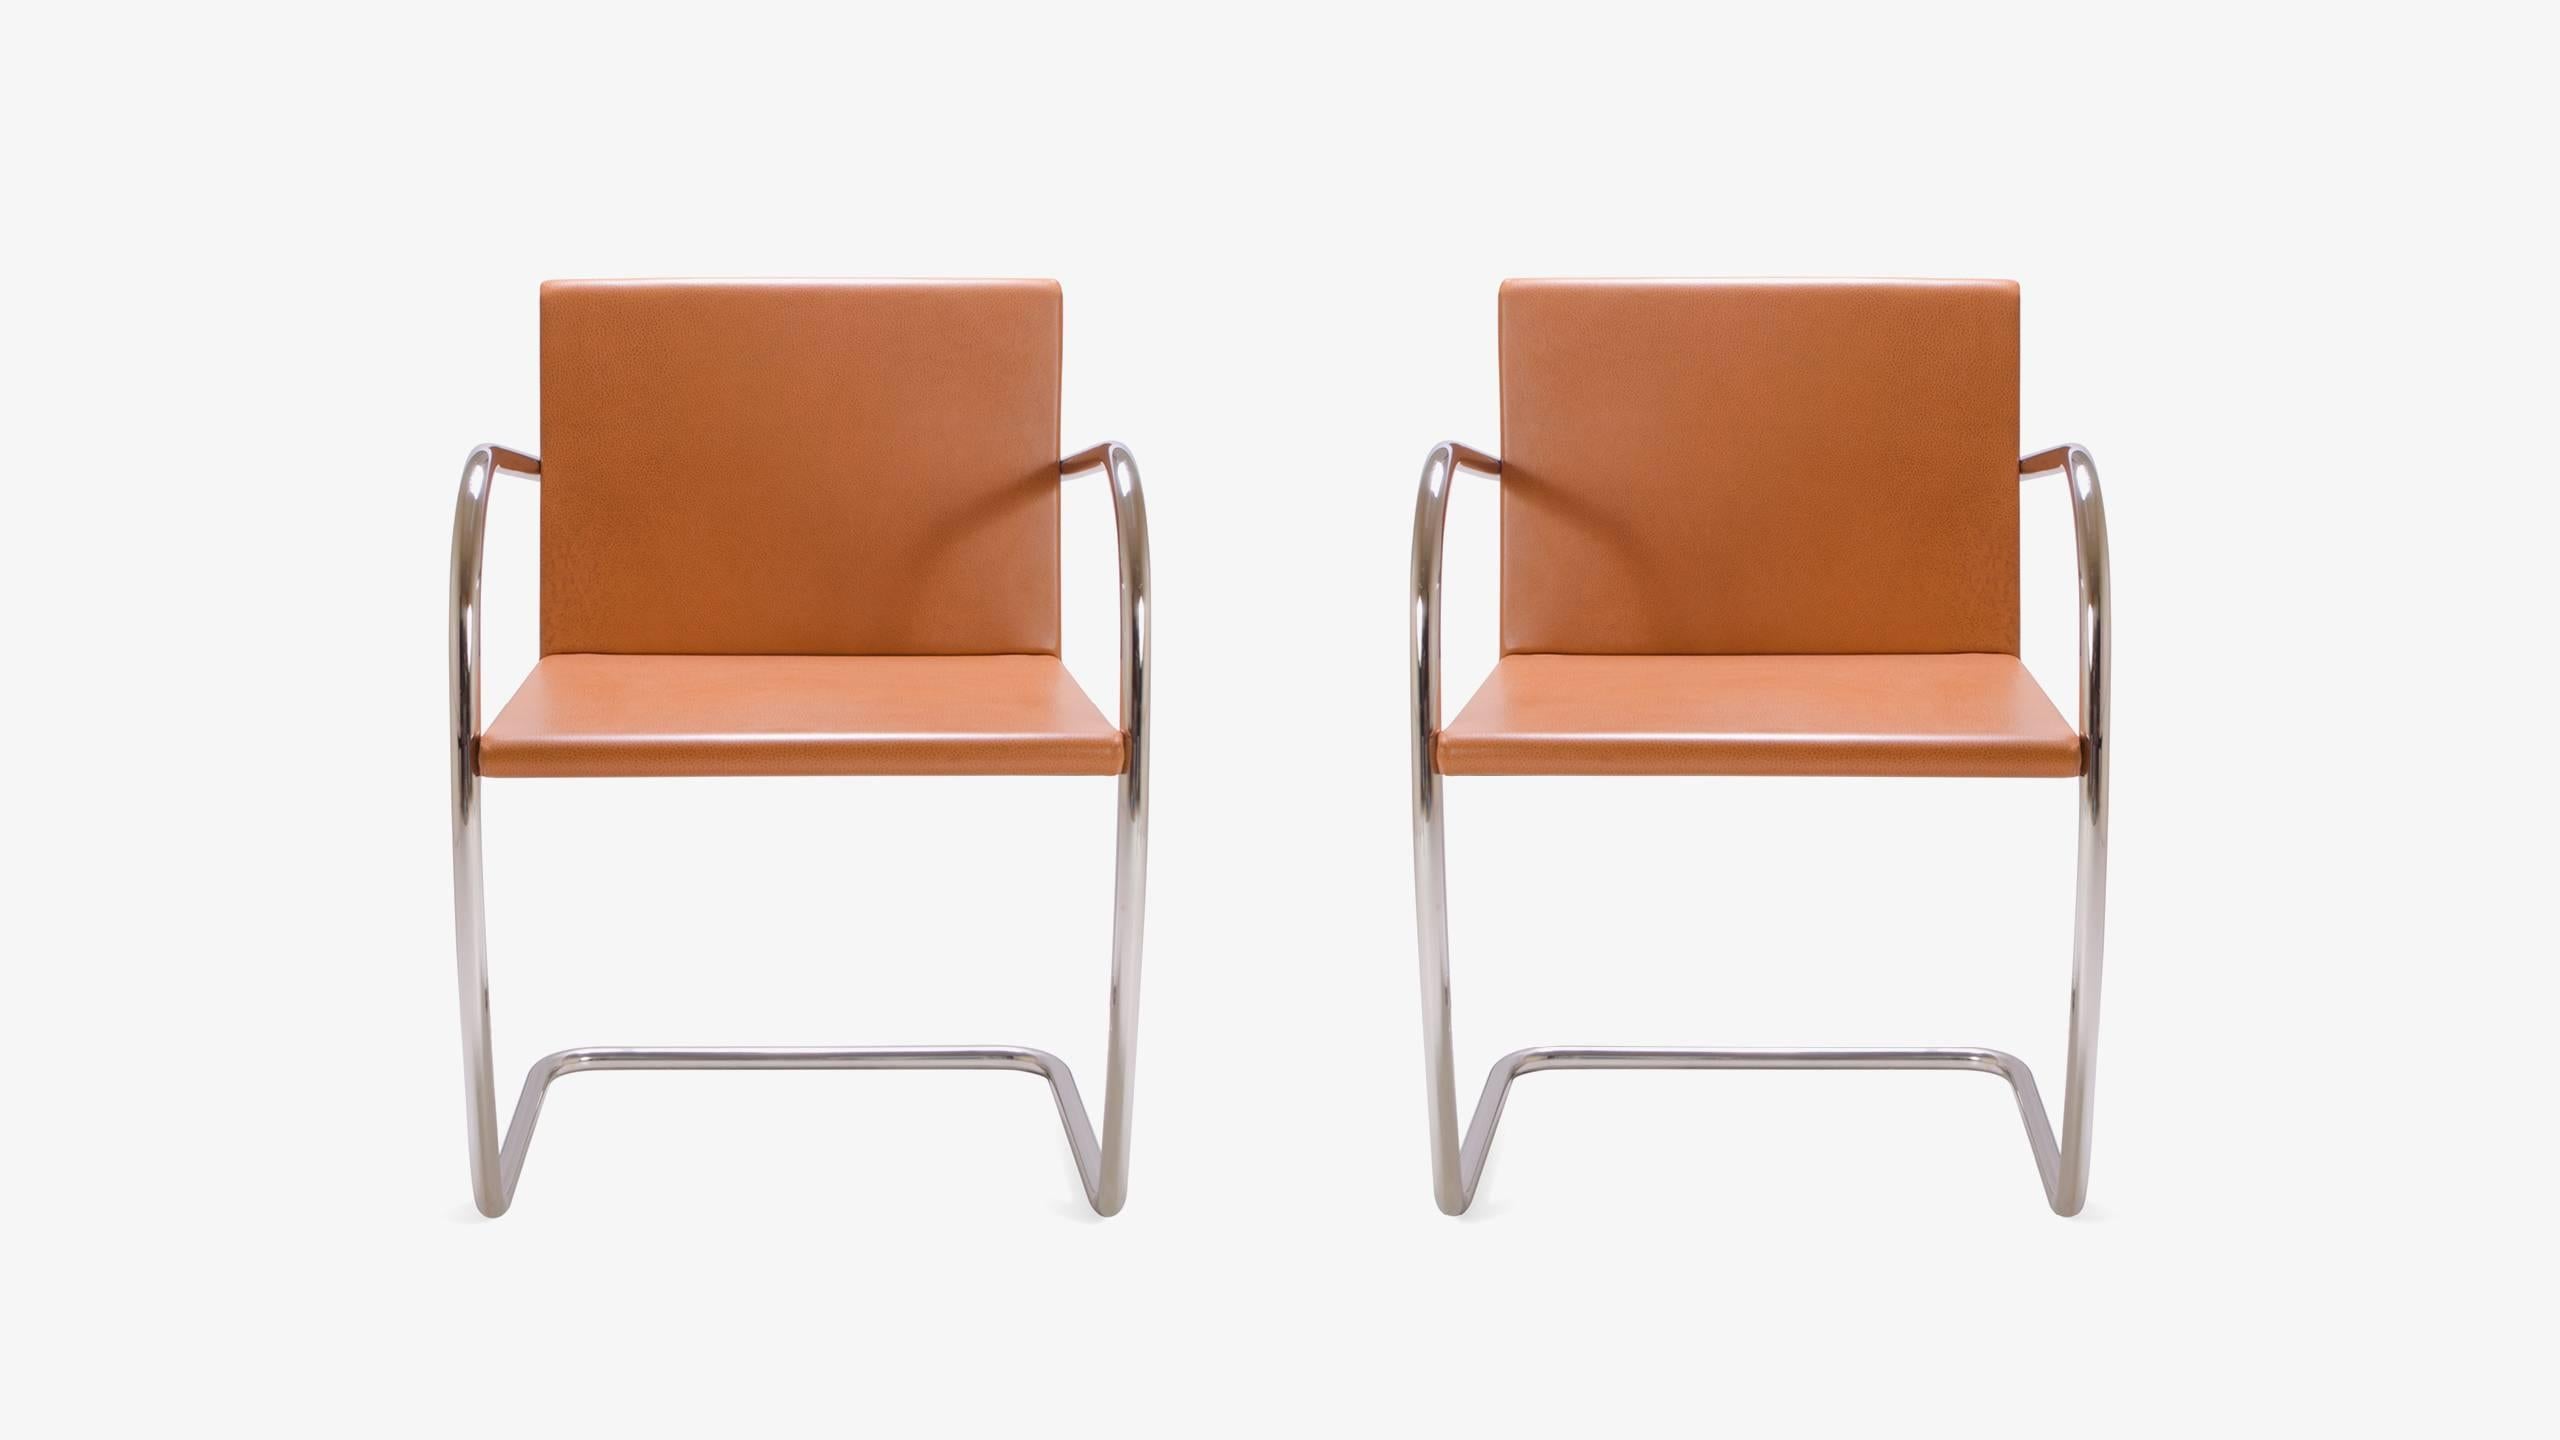 The definition of minimalism in a singular design, achieved by the great Ludwig Mies van der Rohe in 1929; the Brno chair is just that. These are contemporary edition Mies van der Rohe for Knoll chairs upholstered in a rich Caramel Leather, a